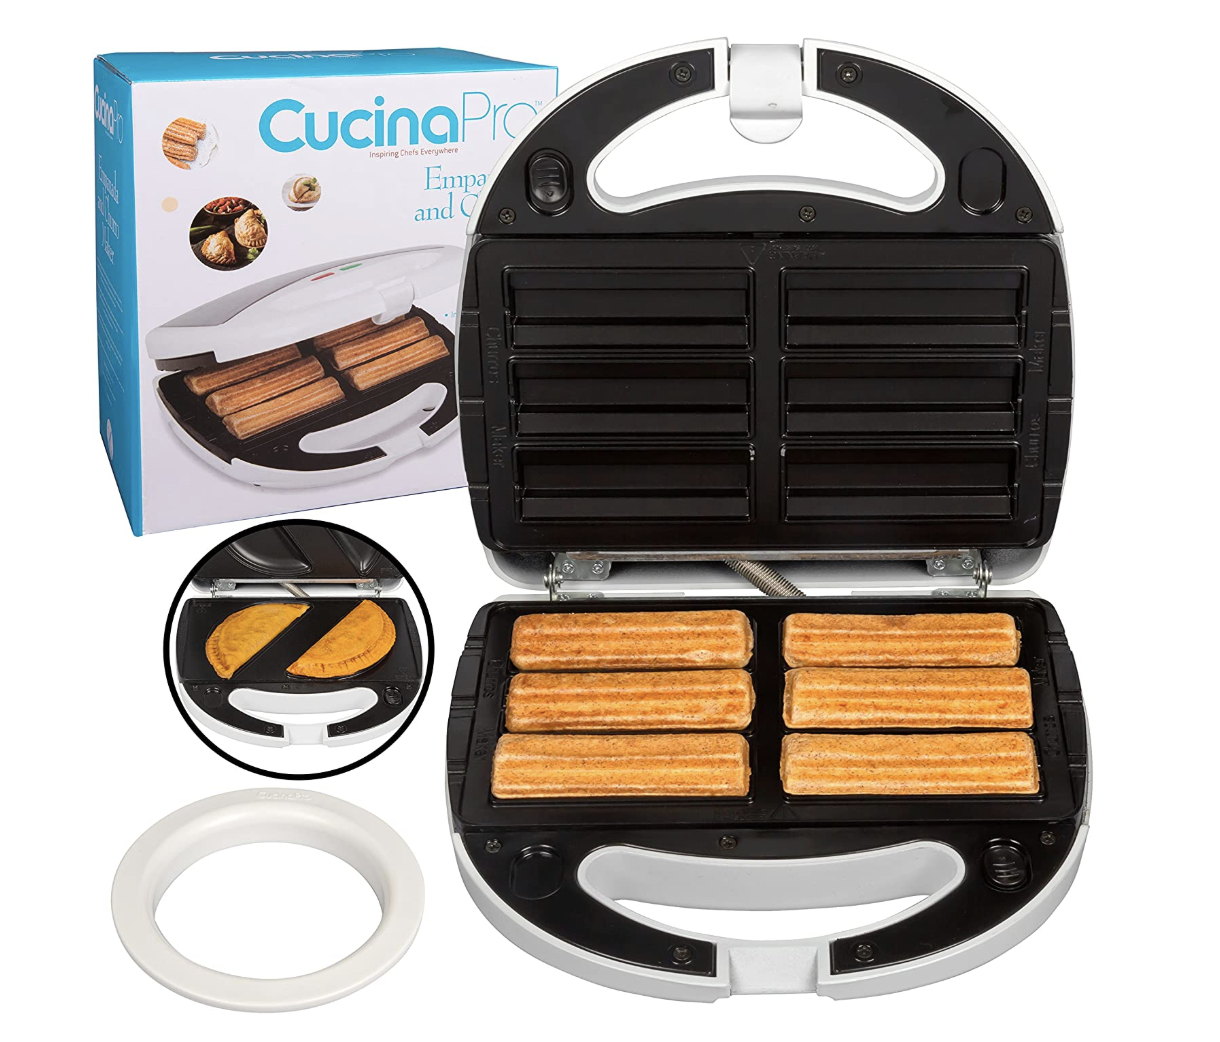 Amazon is selling a machine lets you cook your own churros at home, The Manc